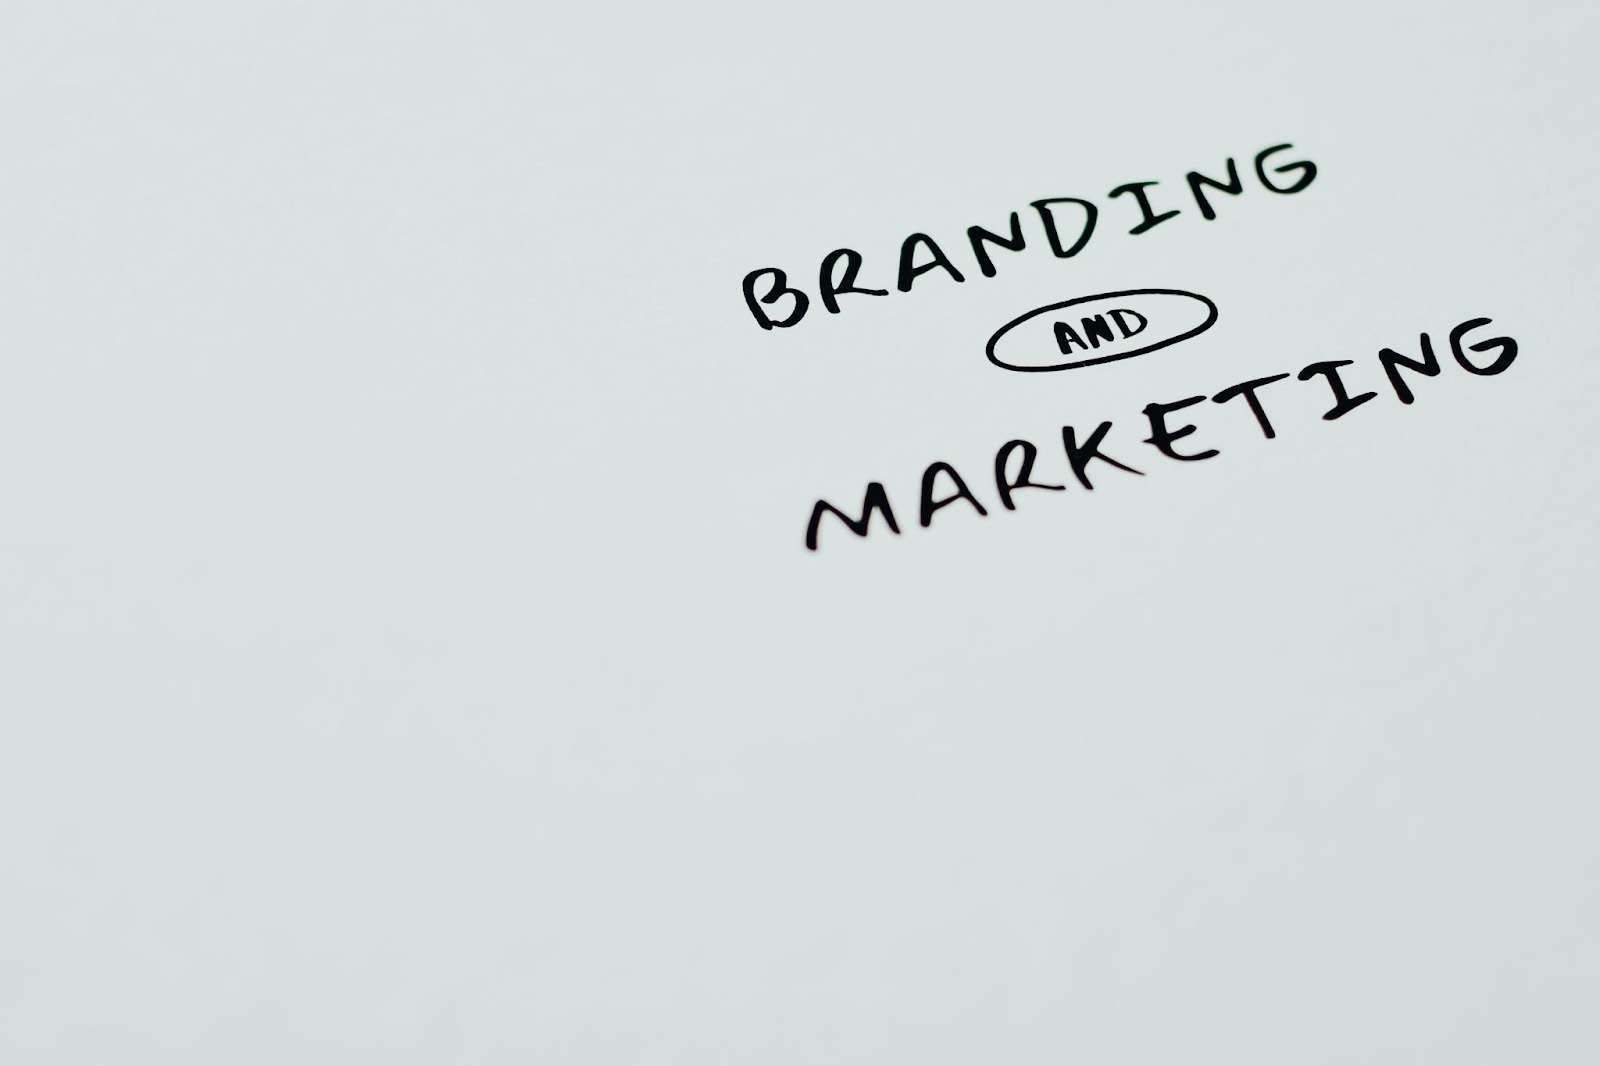 whiteboard with branding and marketing written on it